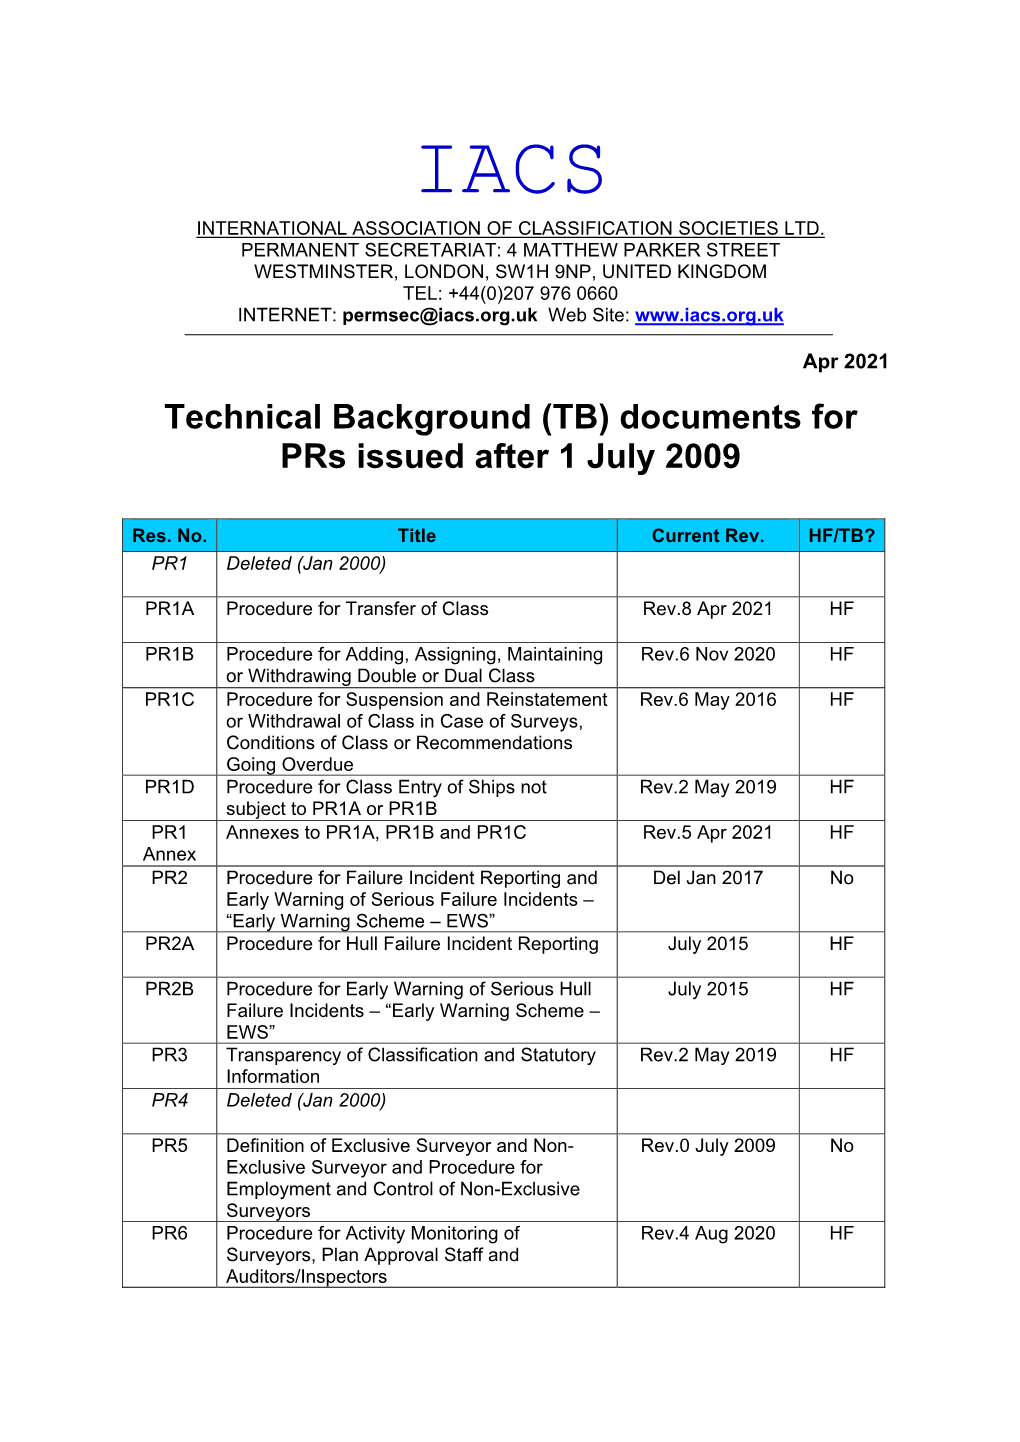 Technical Background (TB) Documents for Prs Issued After 1 July 2009